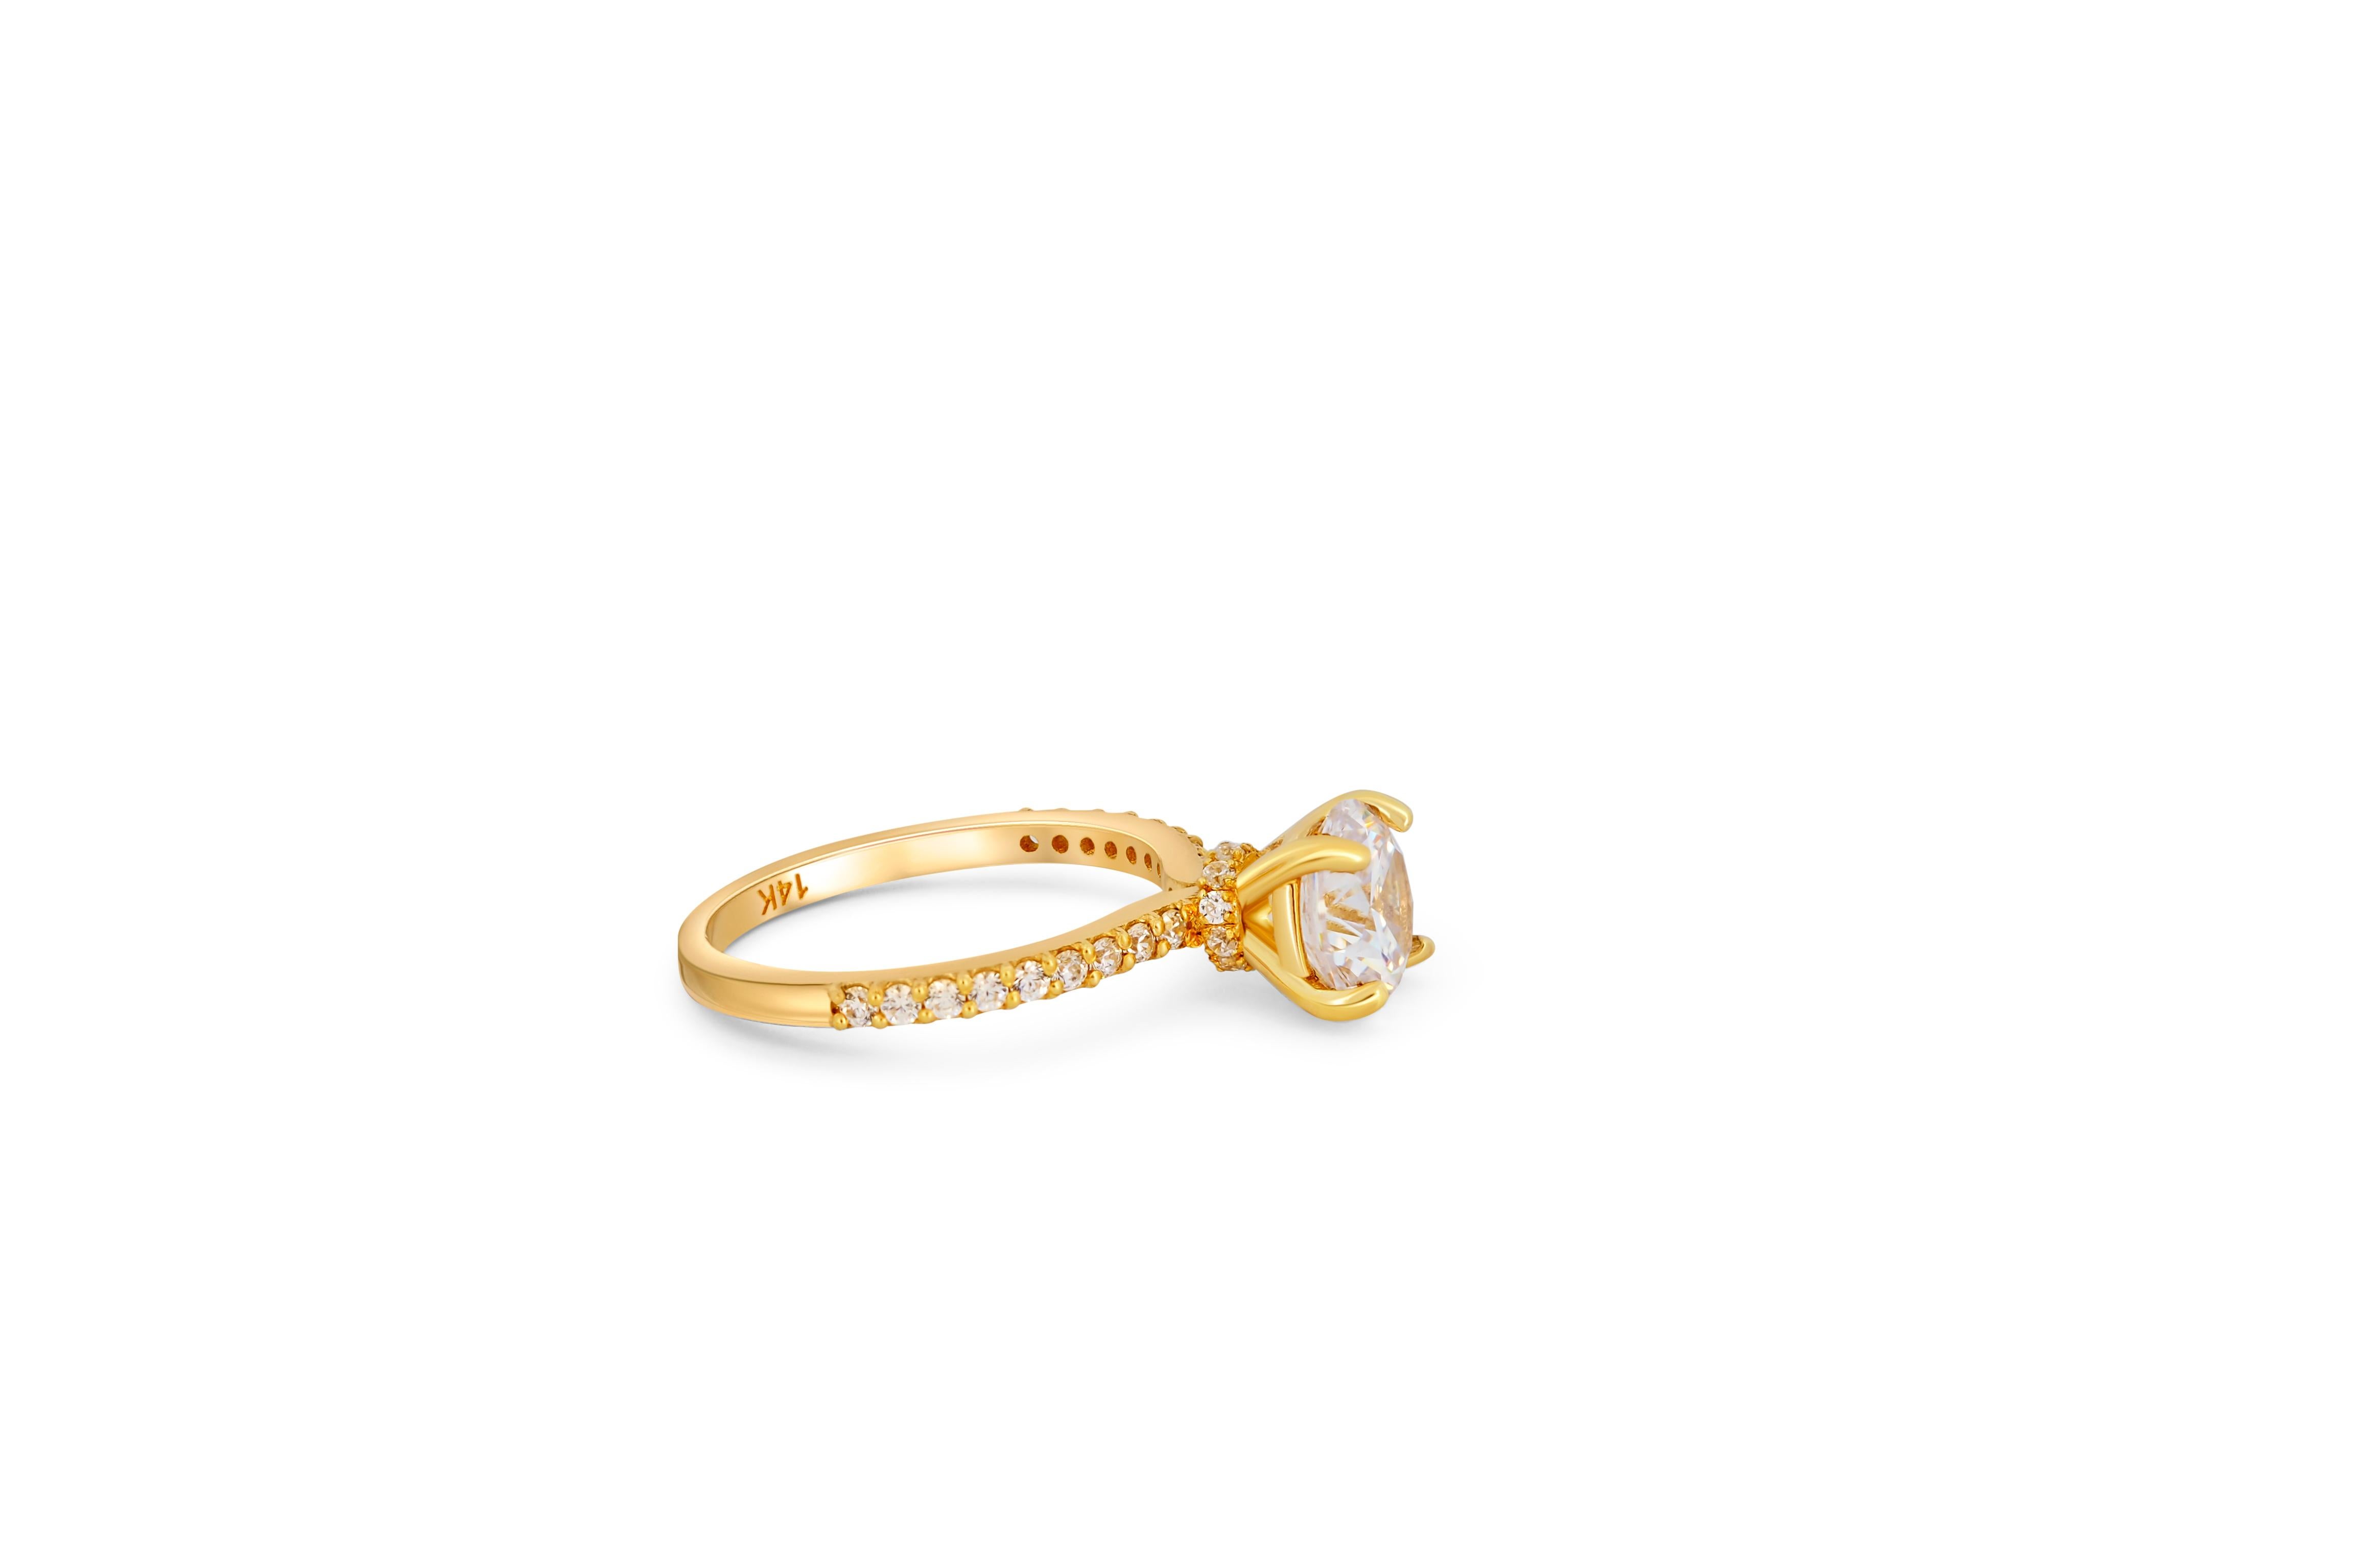 For Sale:  The Veiled Halo Round Brilliant Moissanite Engagement 14k Gold Ring.  5